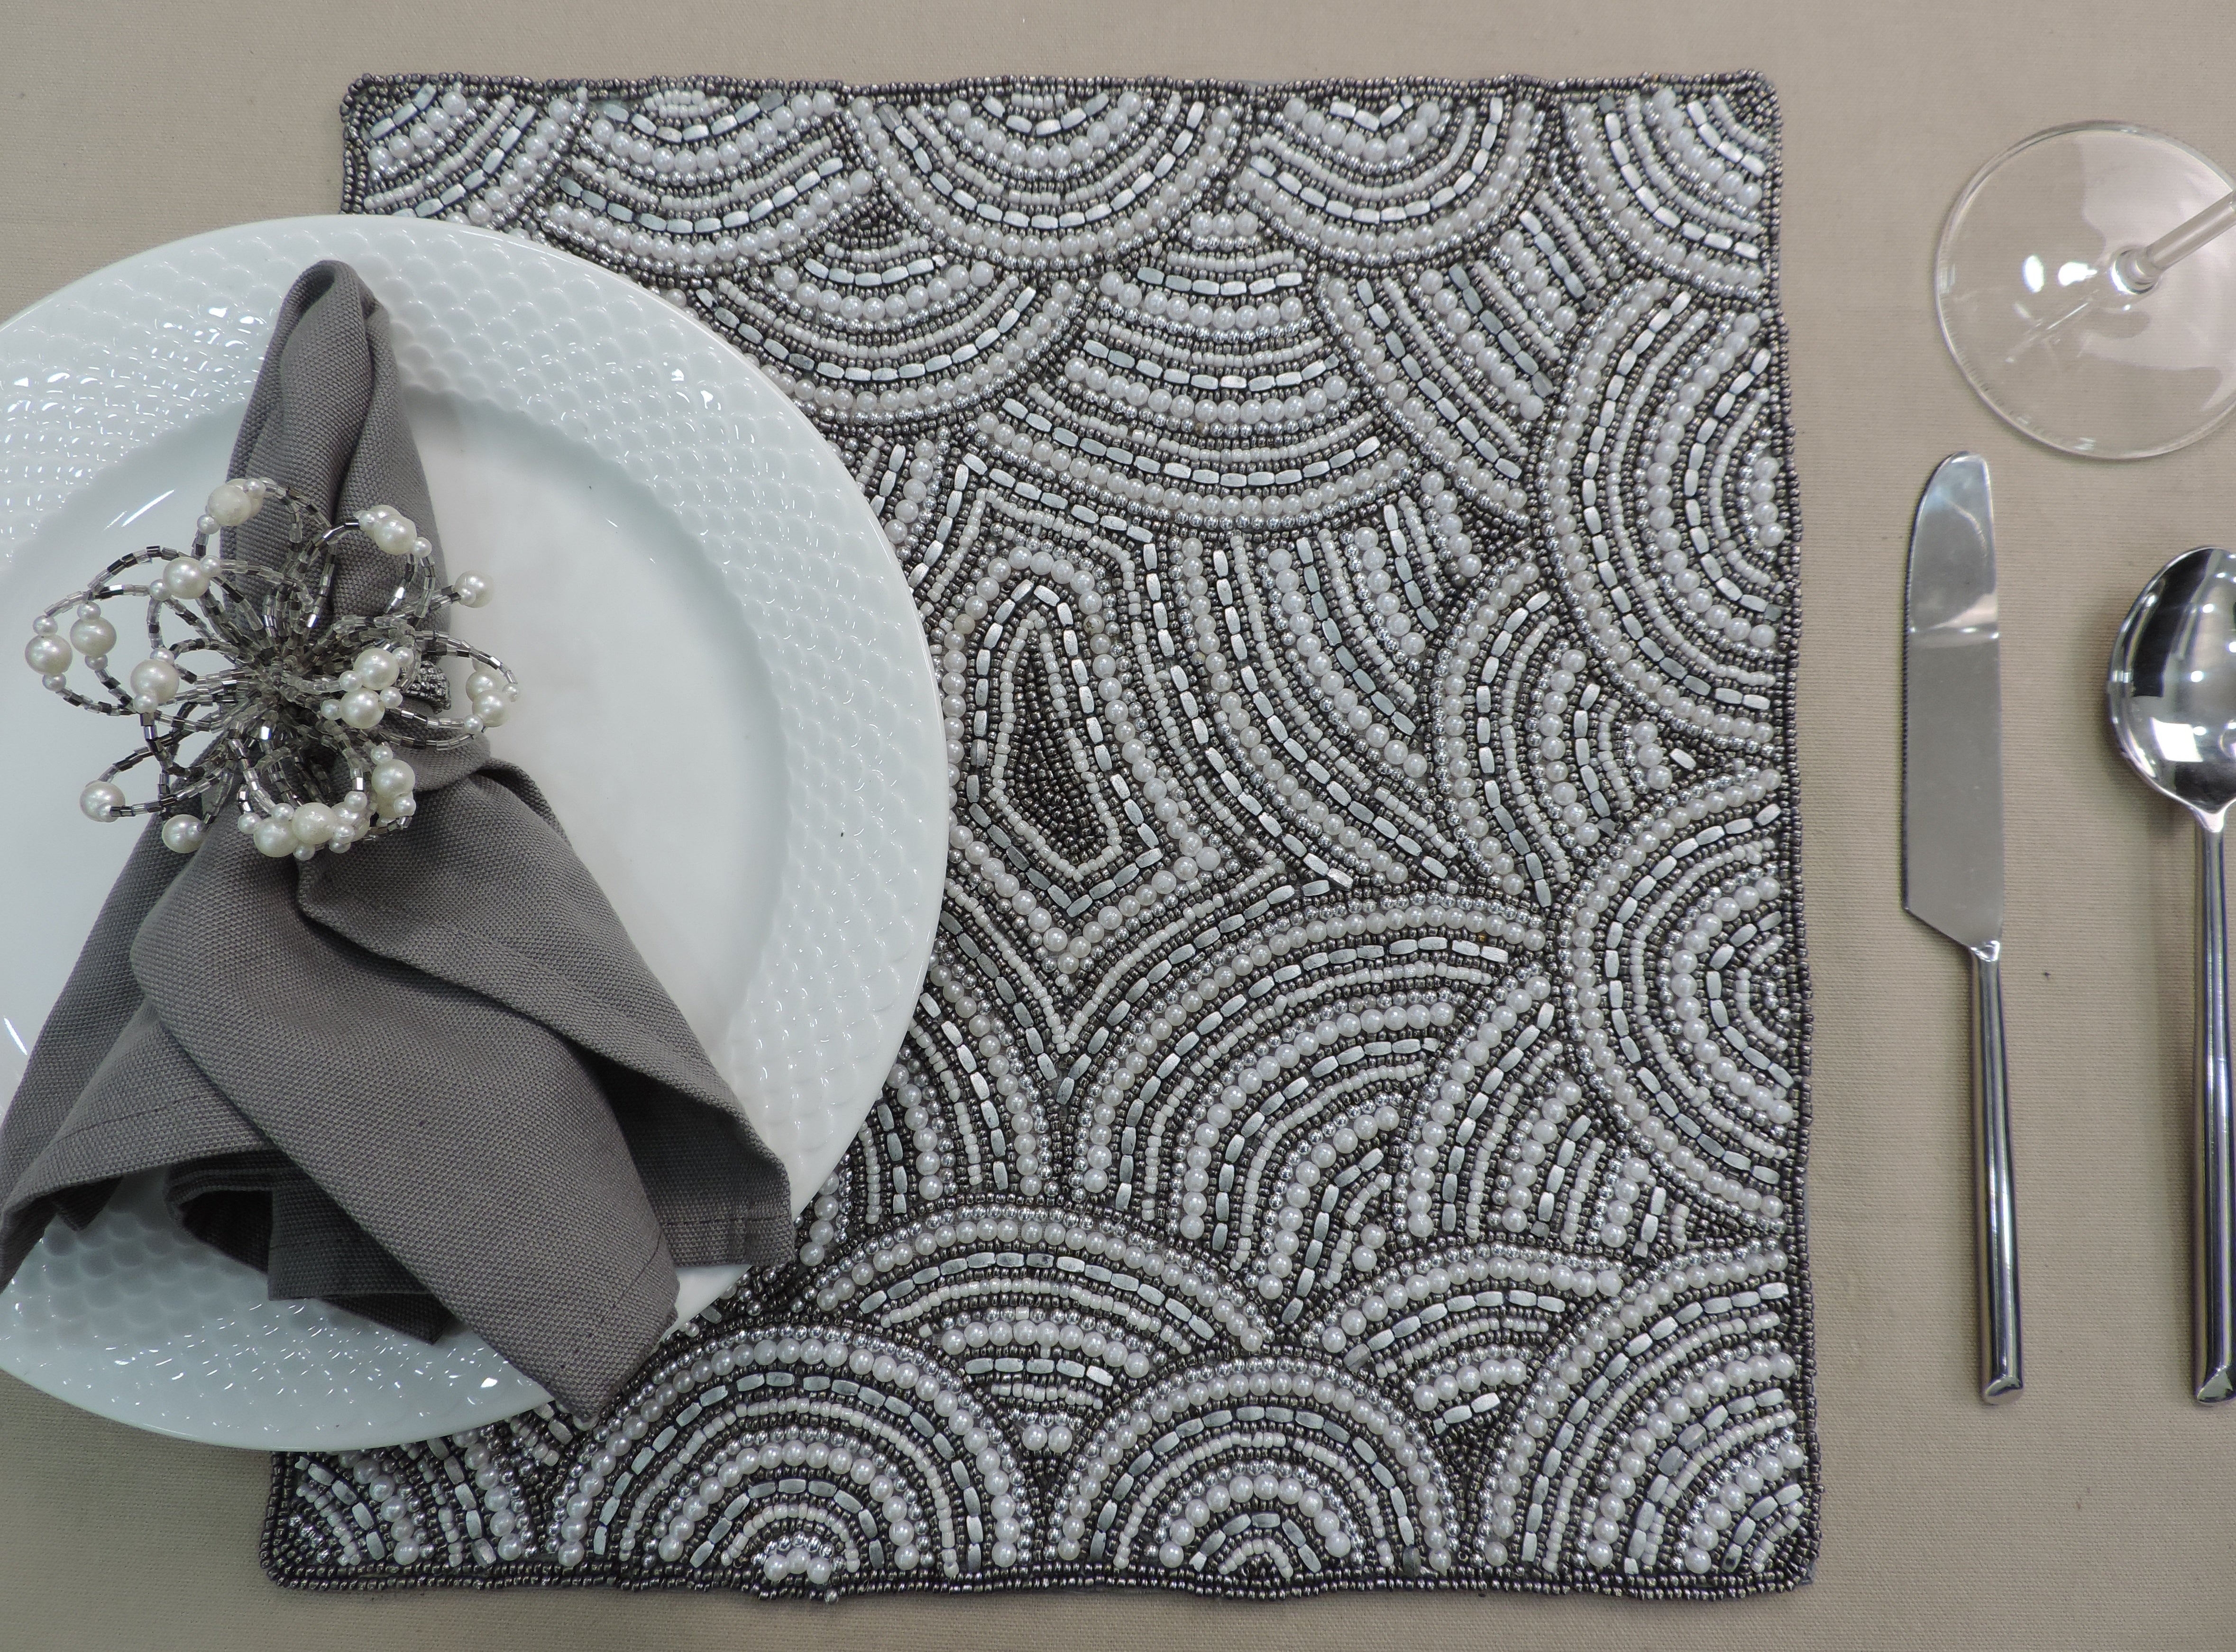 Glass Bead  Flower  Embroidered Placemats, Chargers / Set of 2 / 14in. Square / Smoke & Cream